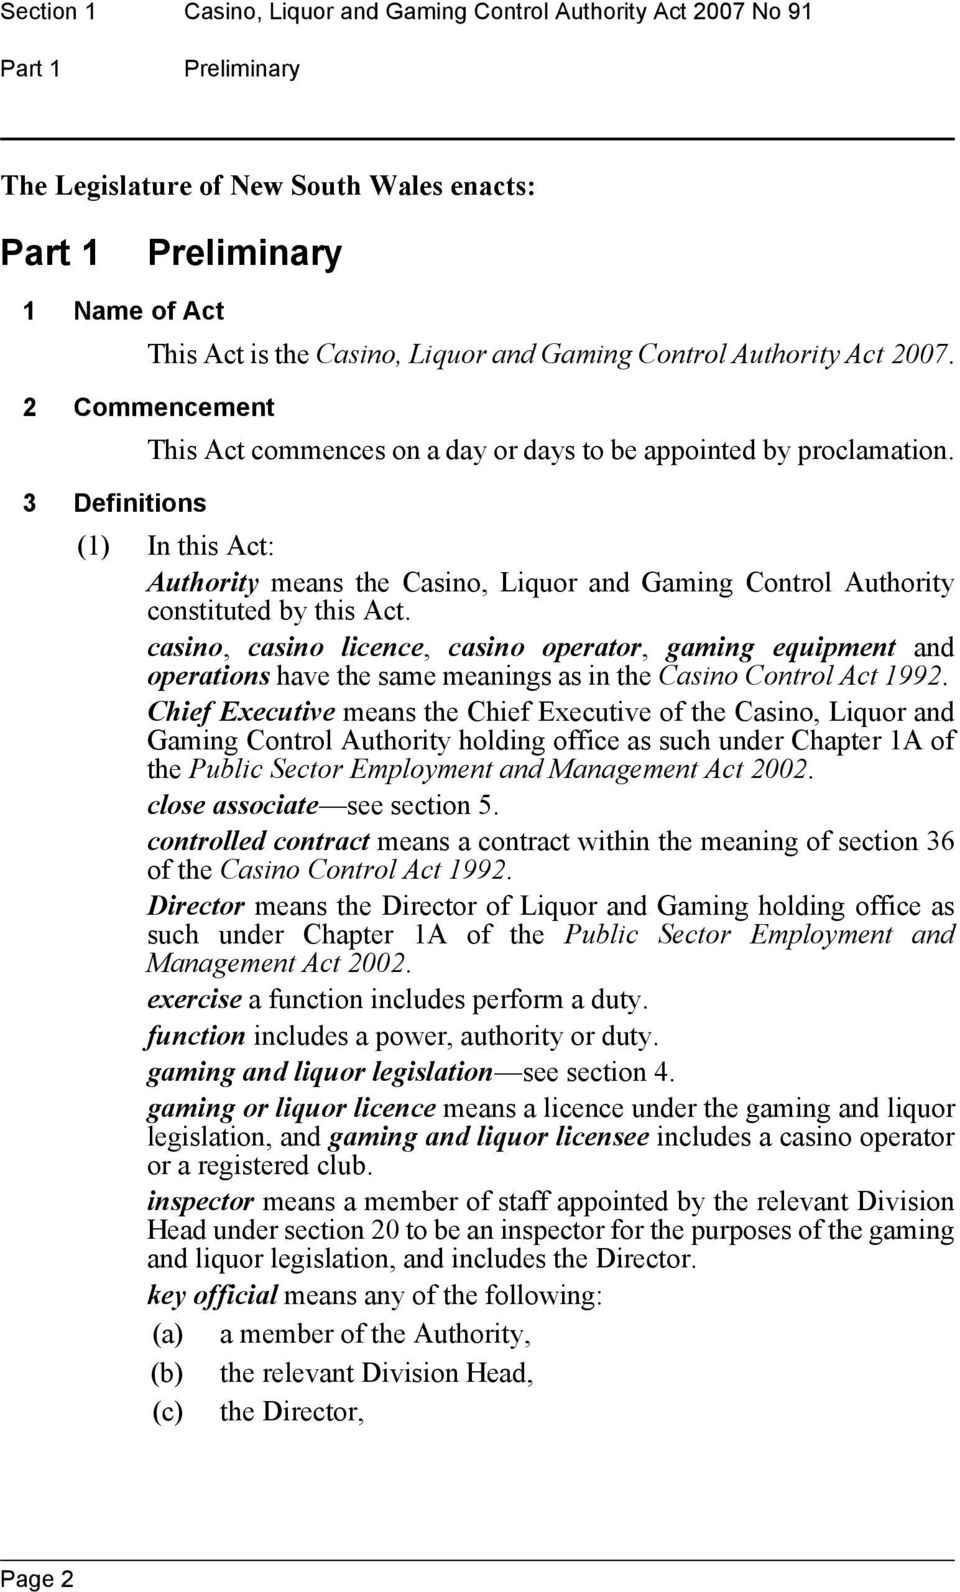 (1) In this Act: Authority means the Casino, Liquor and Gaming Control Authority constituted by this Act.